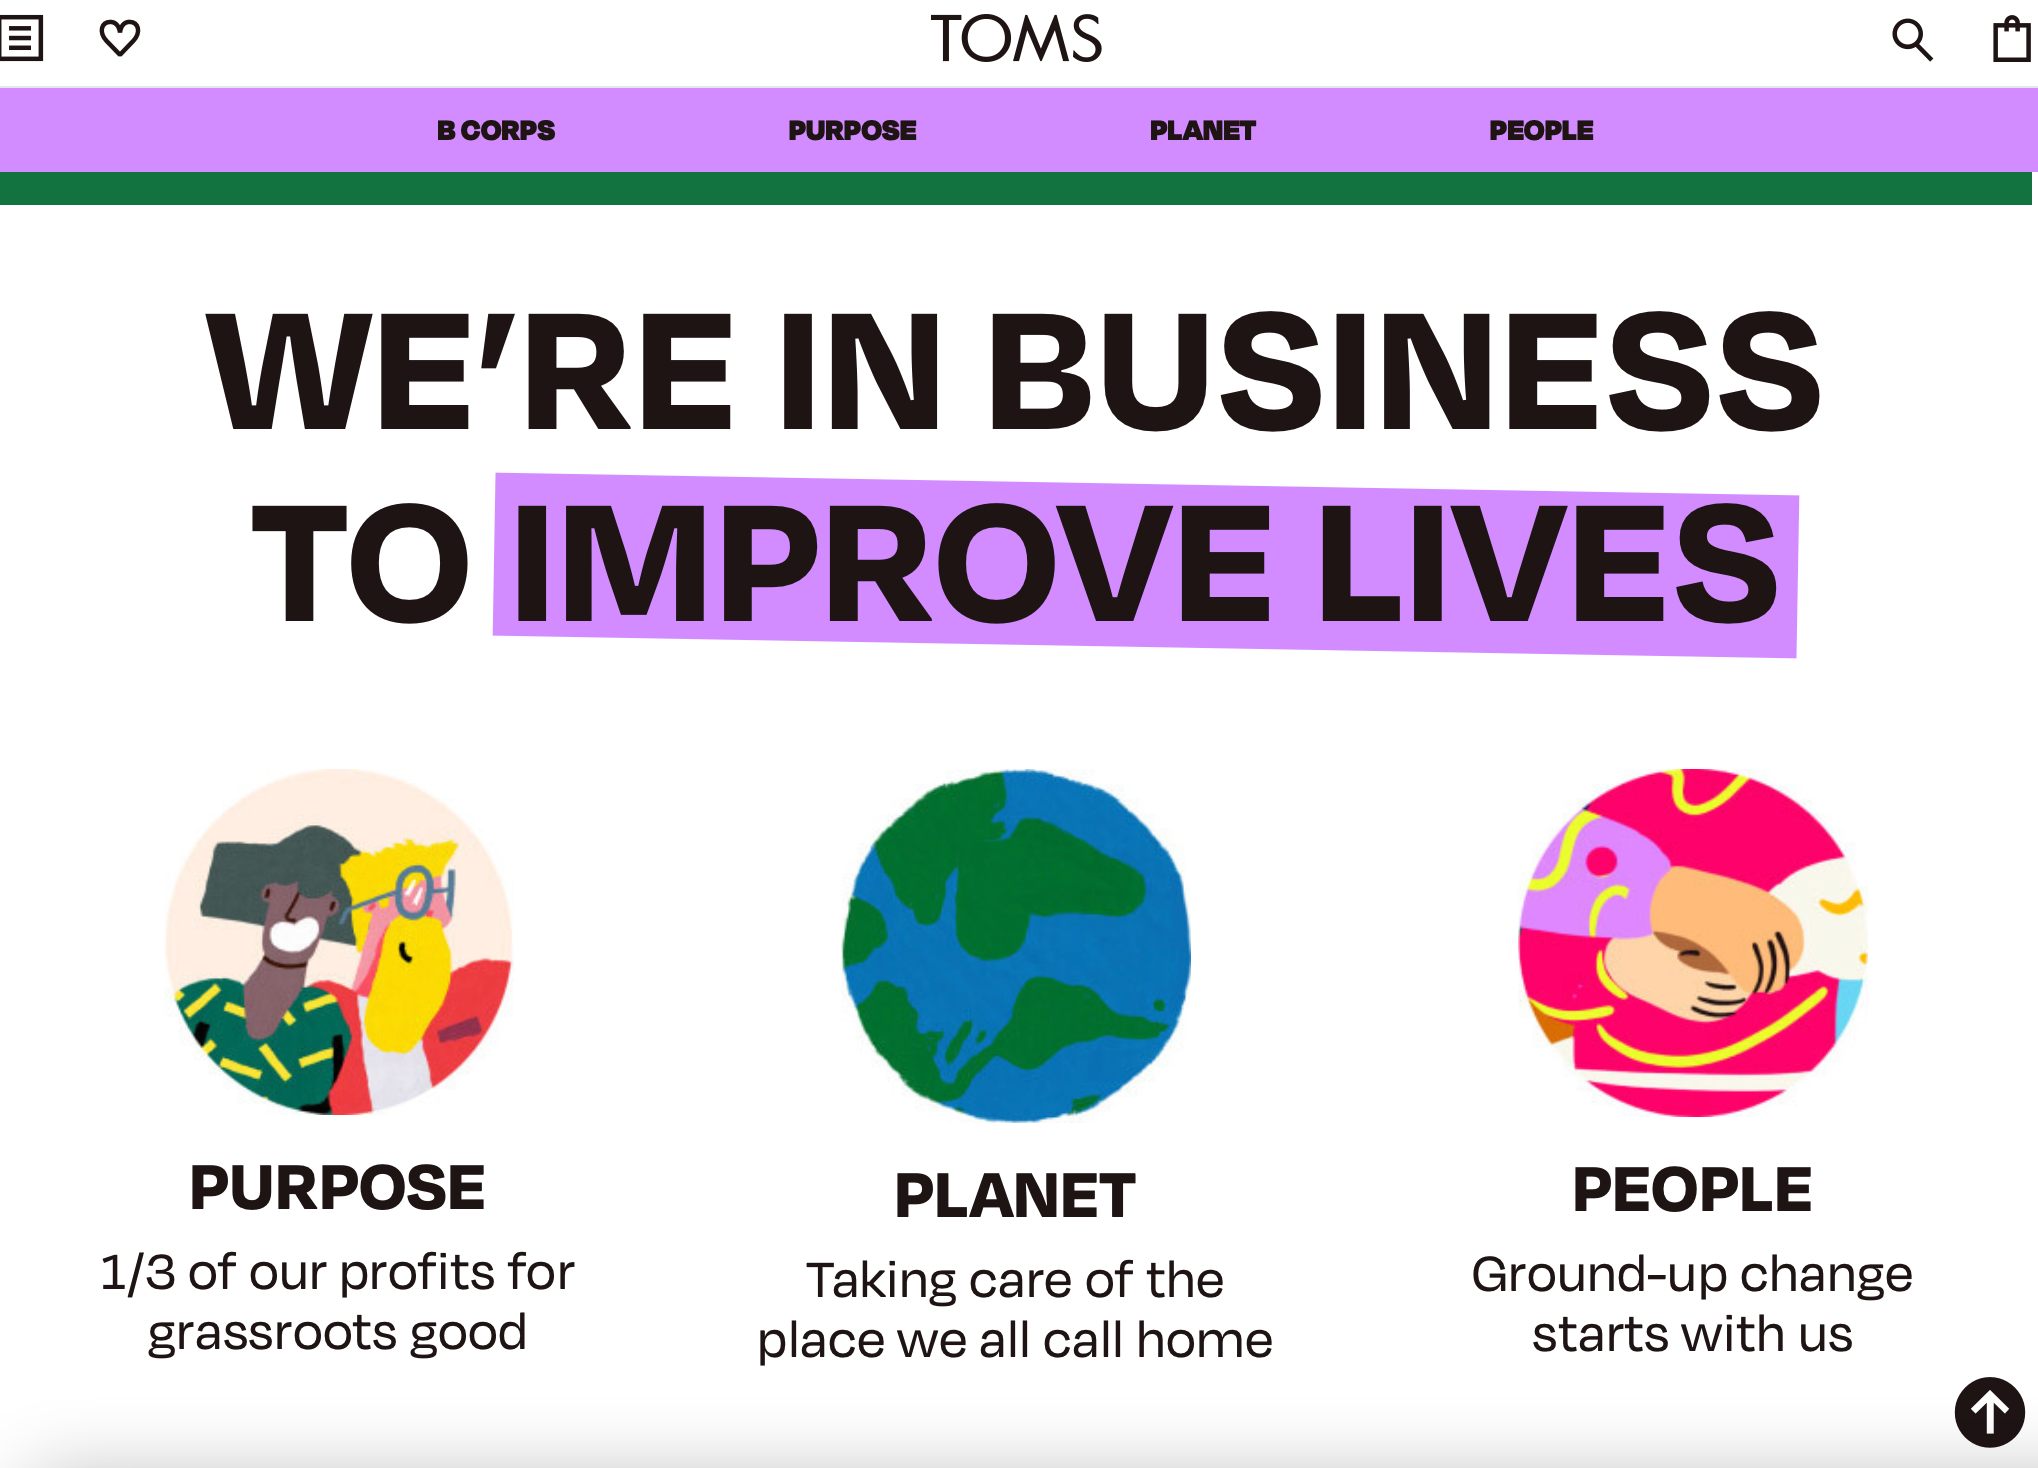 TOMS shows how they keep their promises to give back on their website.